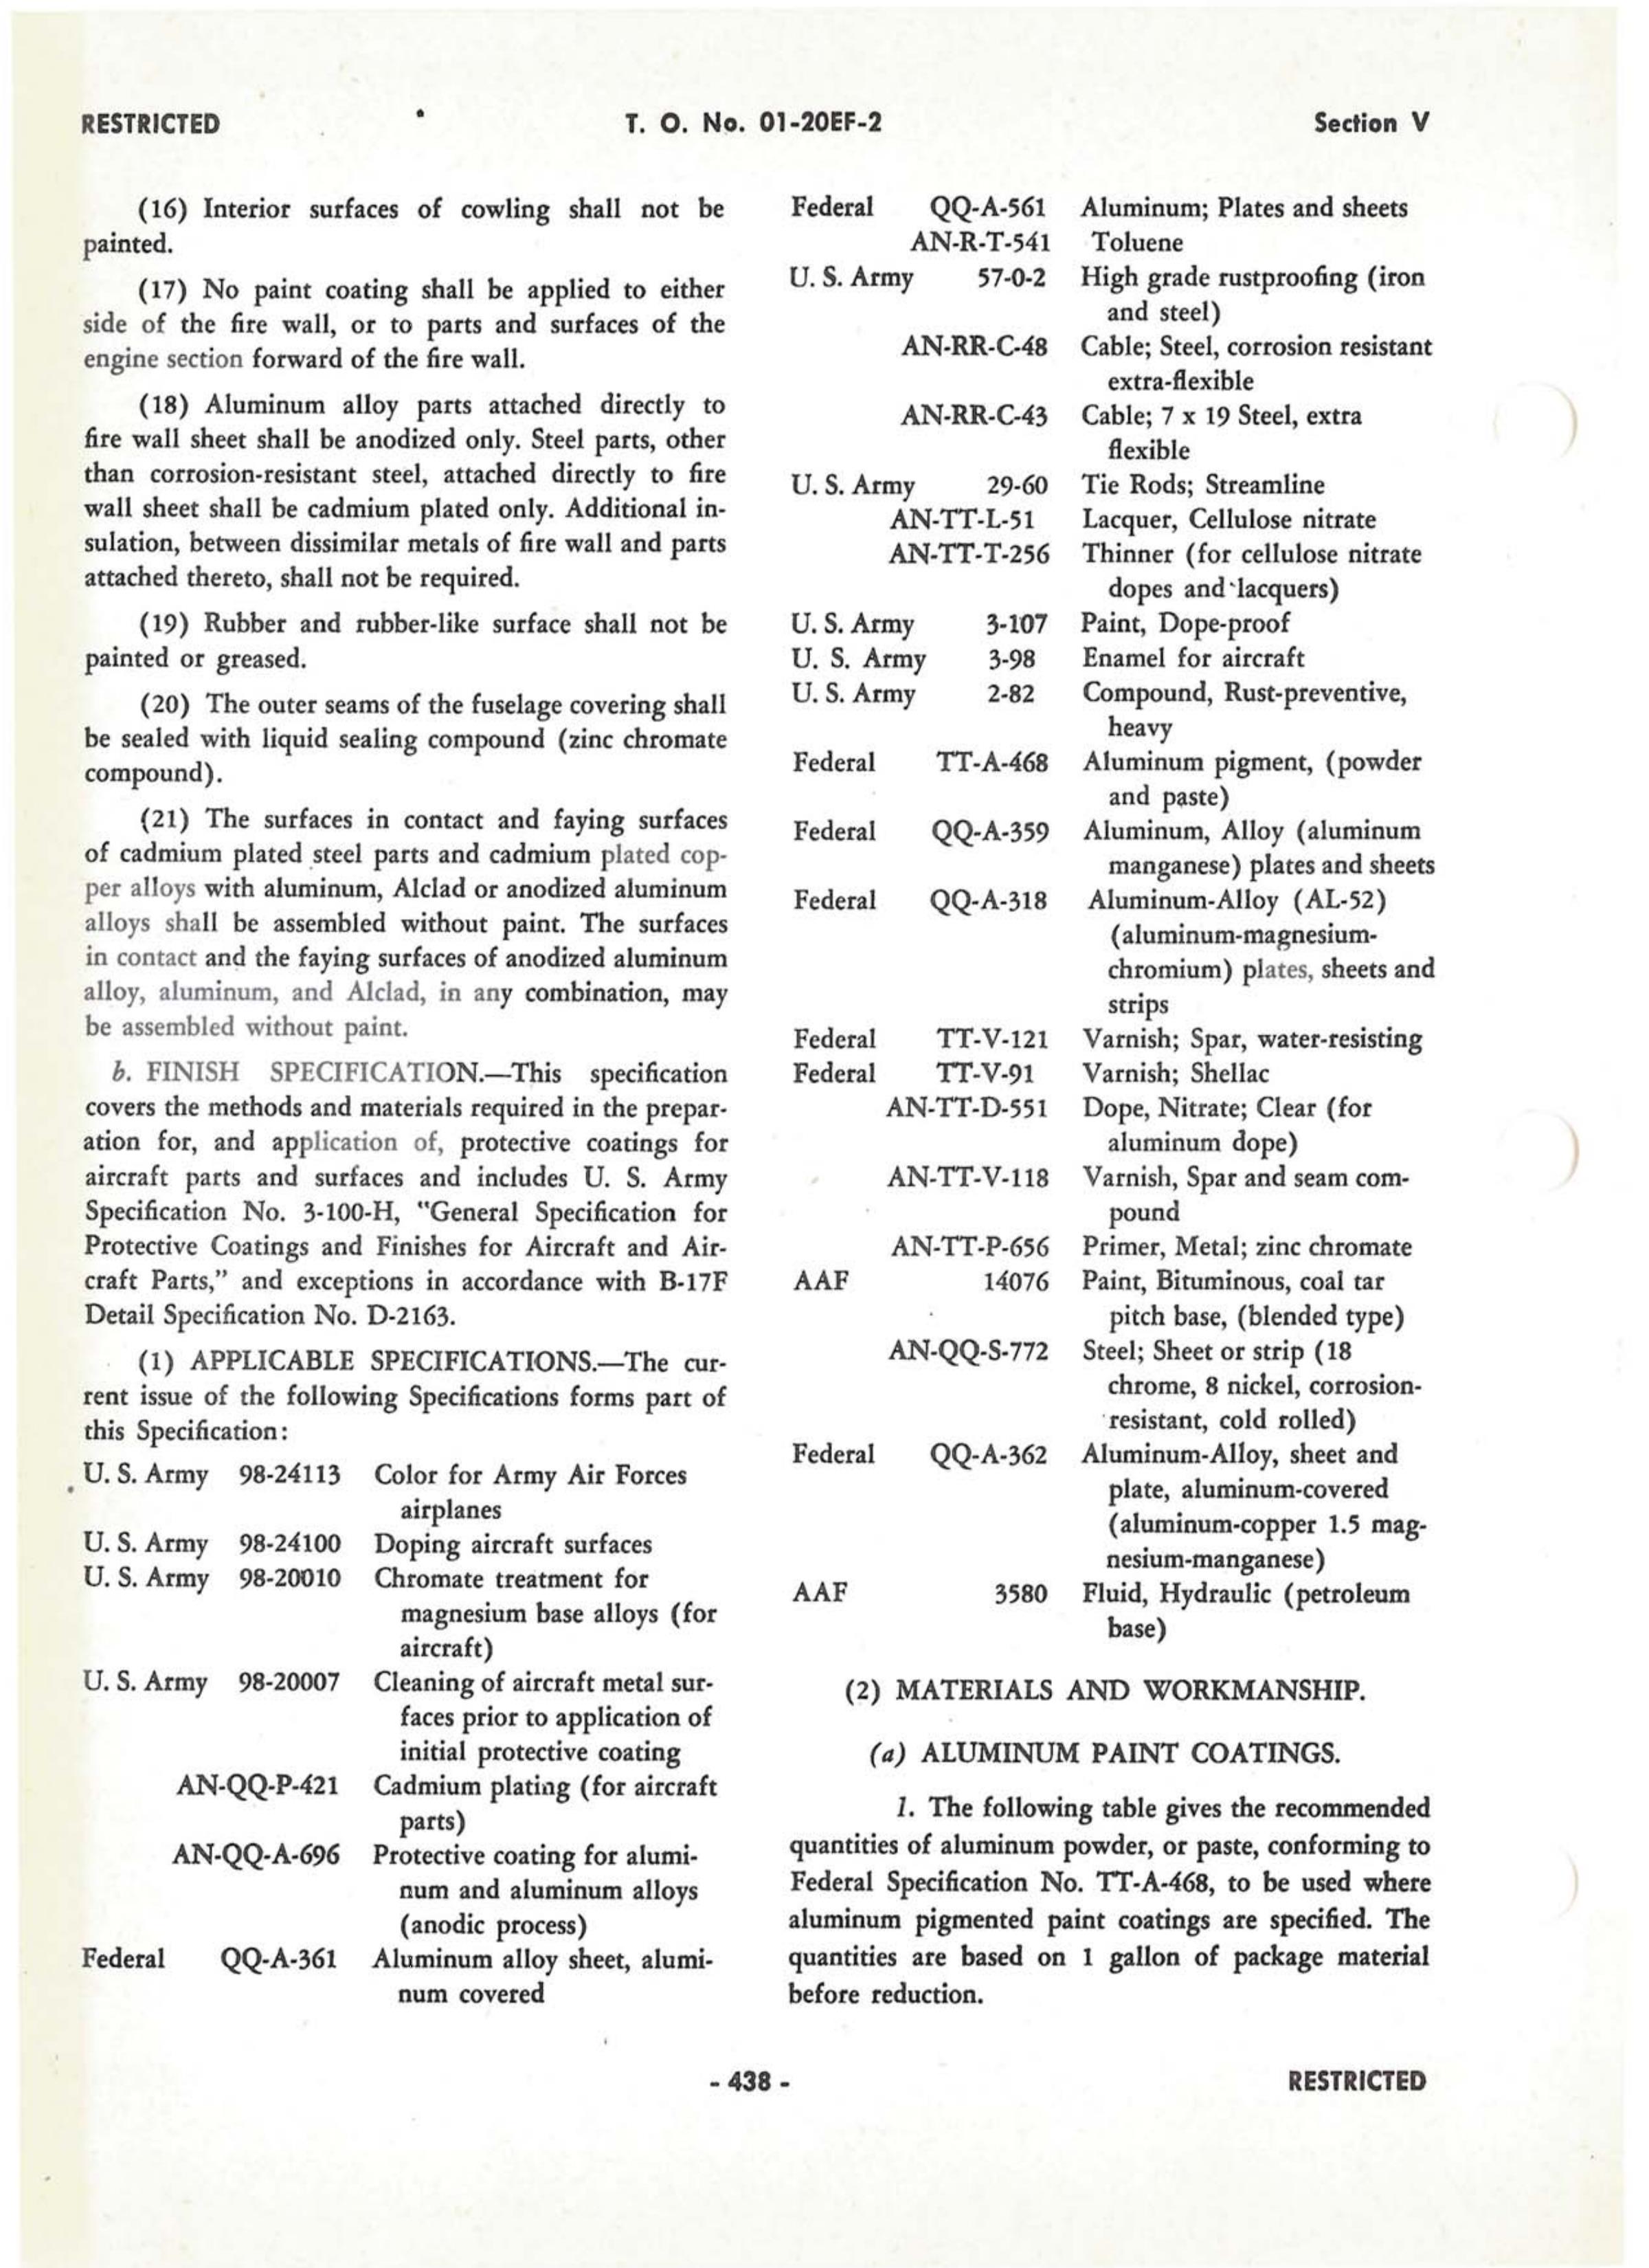 Sample page 522 from AirCorps Library document: Erection & Maintenance - B-17F - Sept 1943